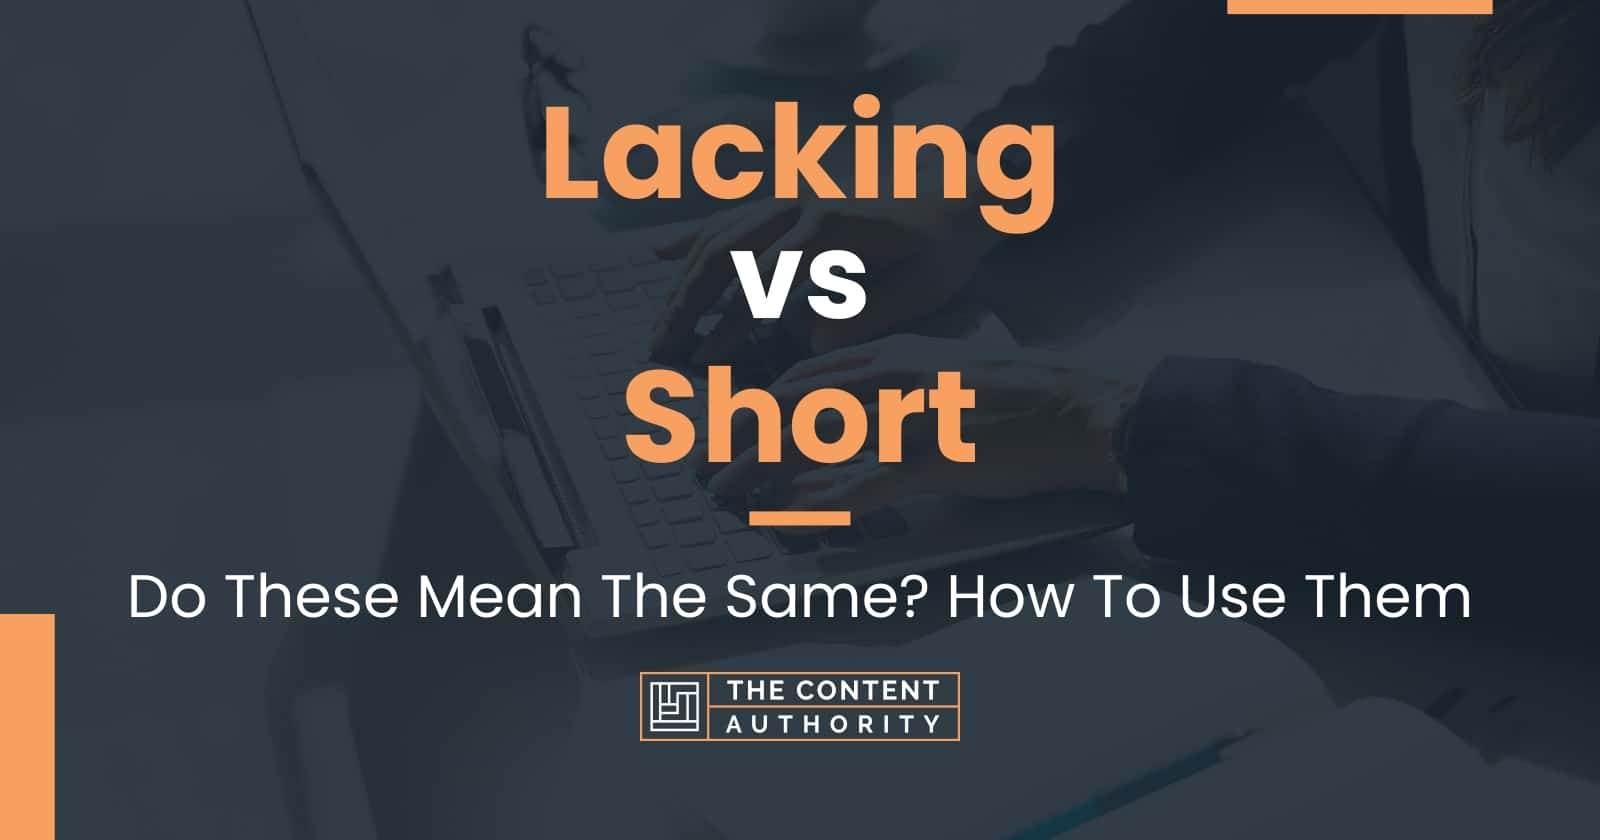 Lacking vs Short: Do These Mean The Same? How To Use Them